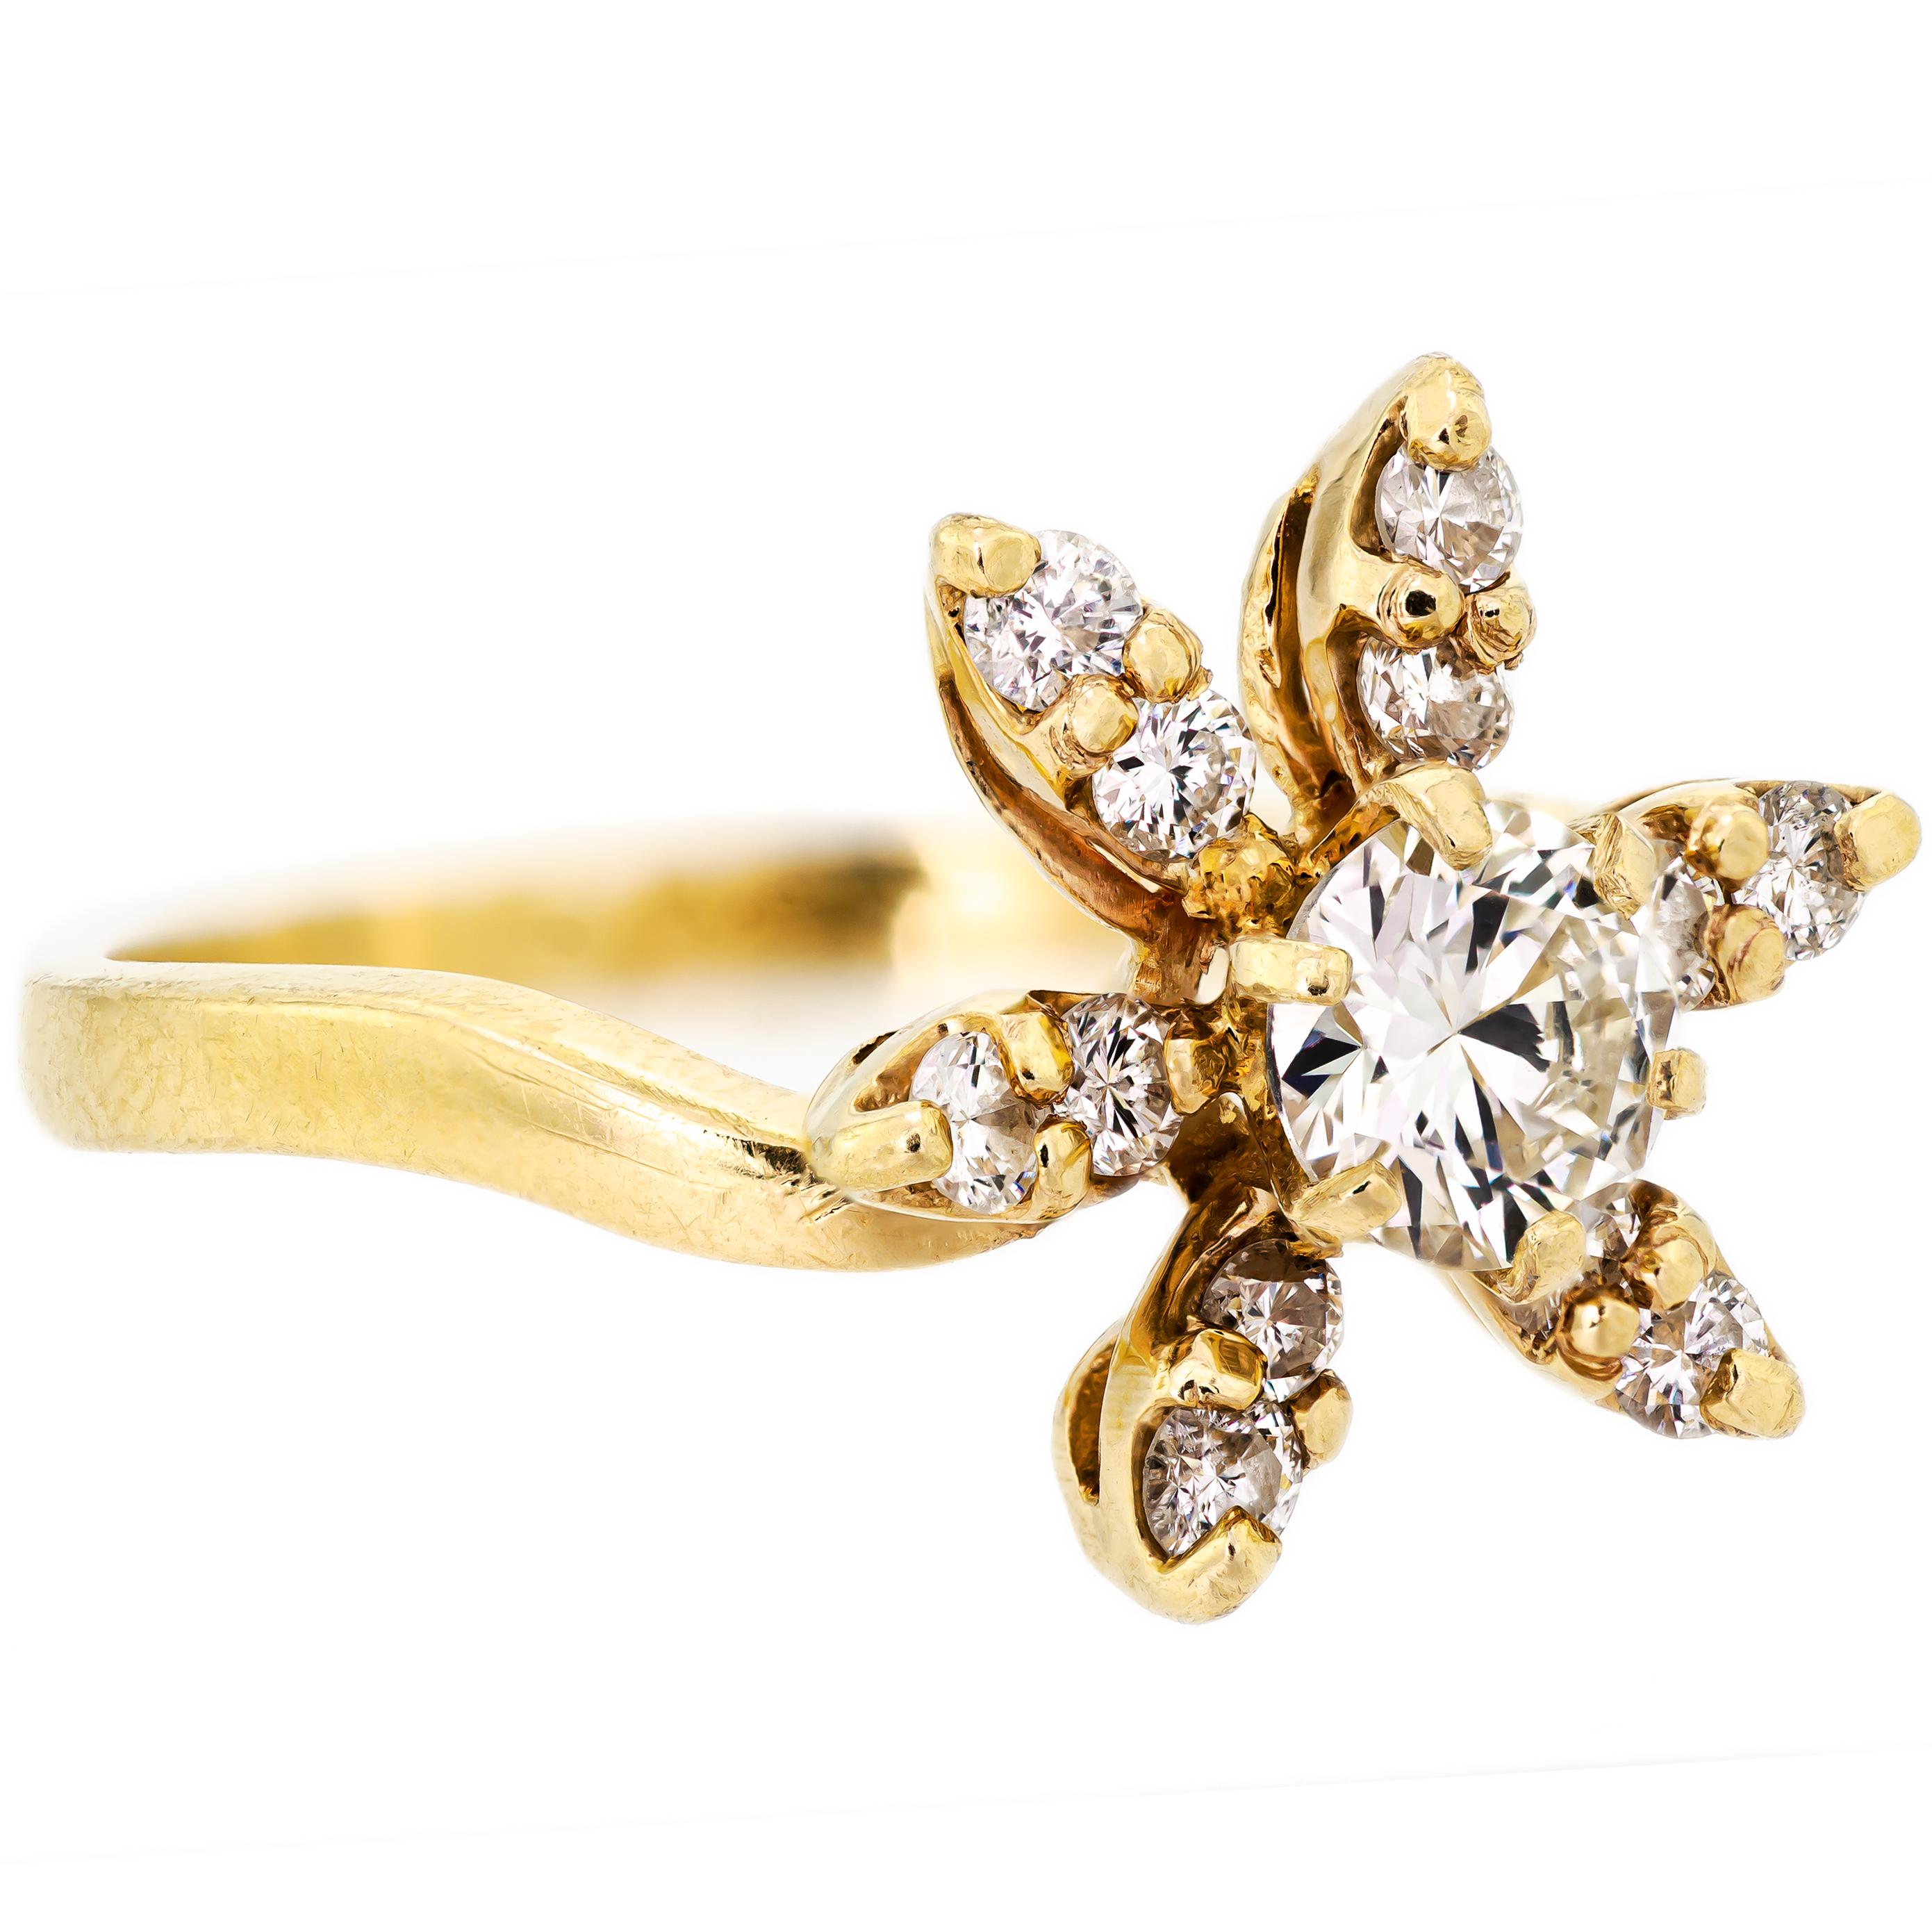 This lively dainty flower design diamond ring is showcasing thirteen (13) dazzling round Brilliant-Cut diamonds totaling 1.05ct. The center of the flower design is set with one (1) round 0.55ct brilliant cut diamond. Six (6) petals surround the